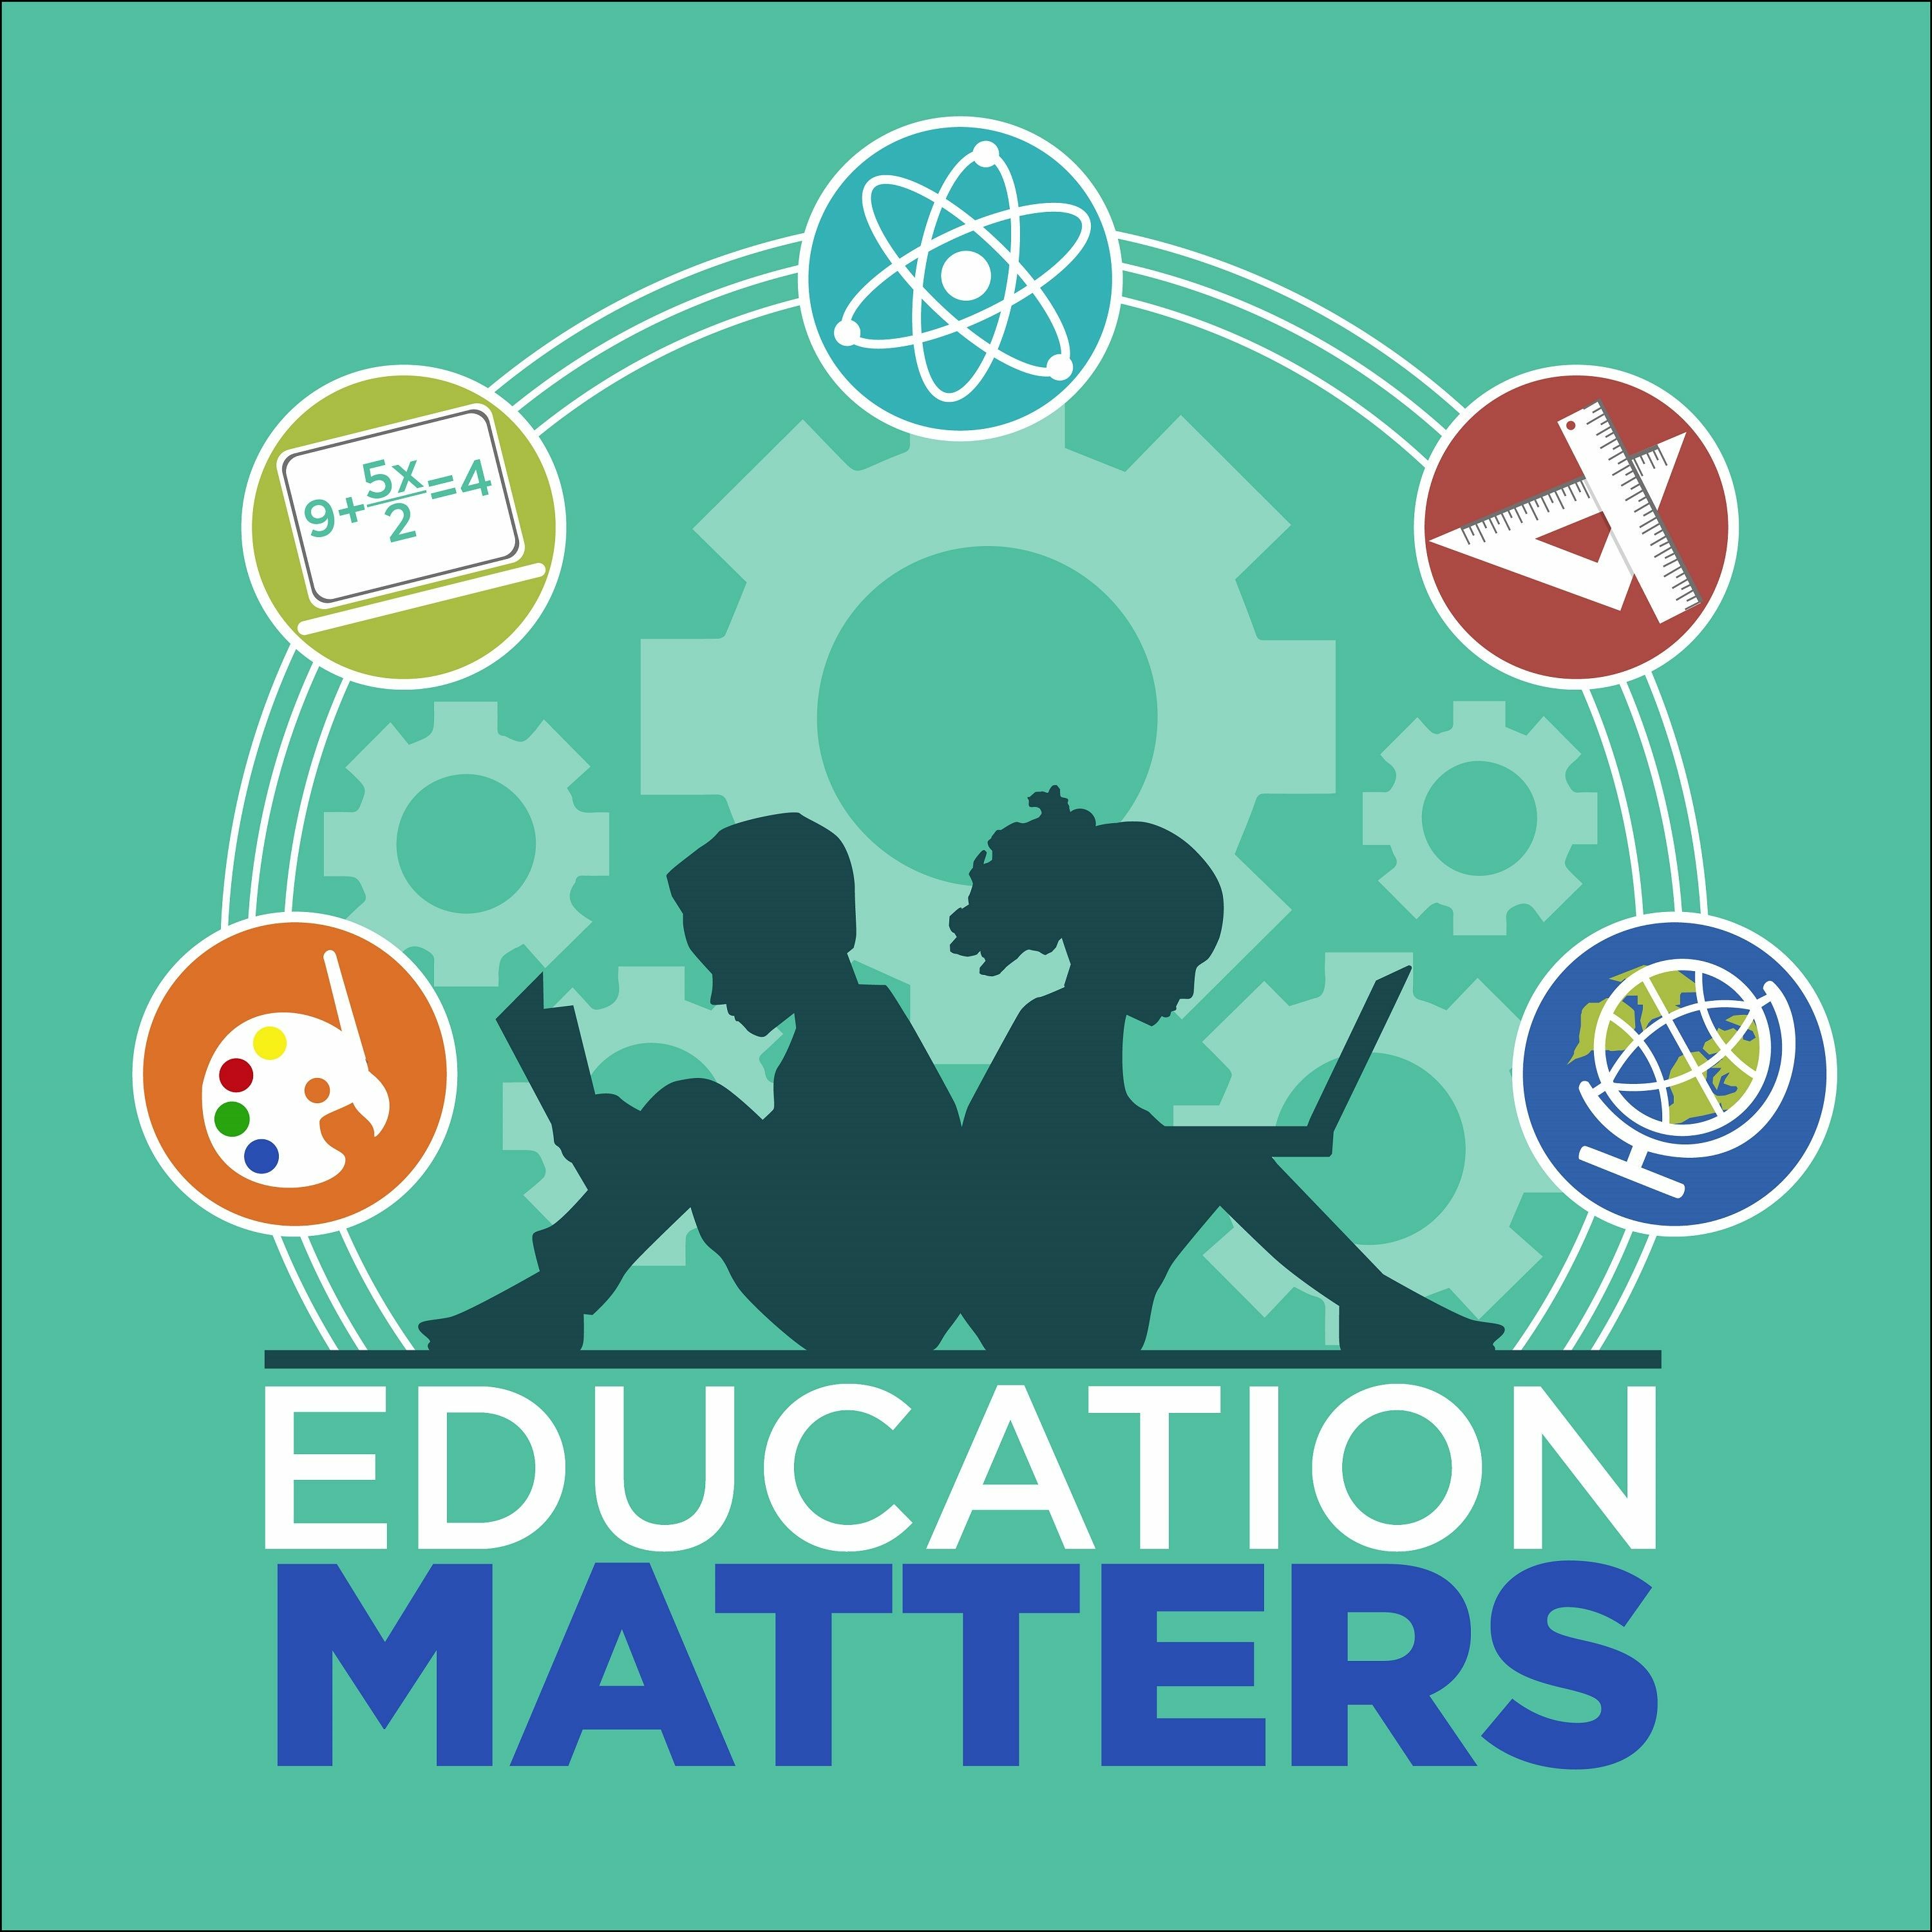 Episode 116 - Addressing the Unique Rural Education Strengths and Challenges in North Carolina